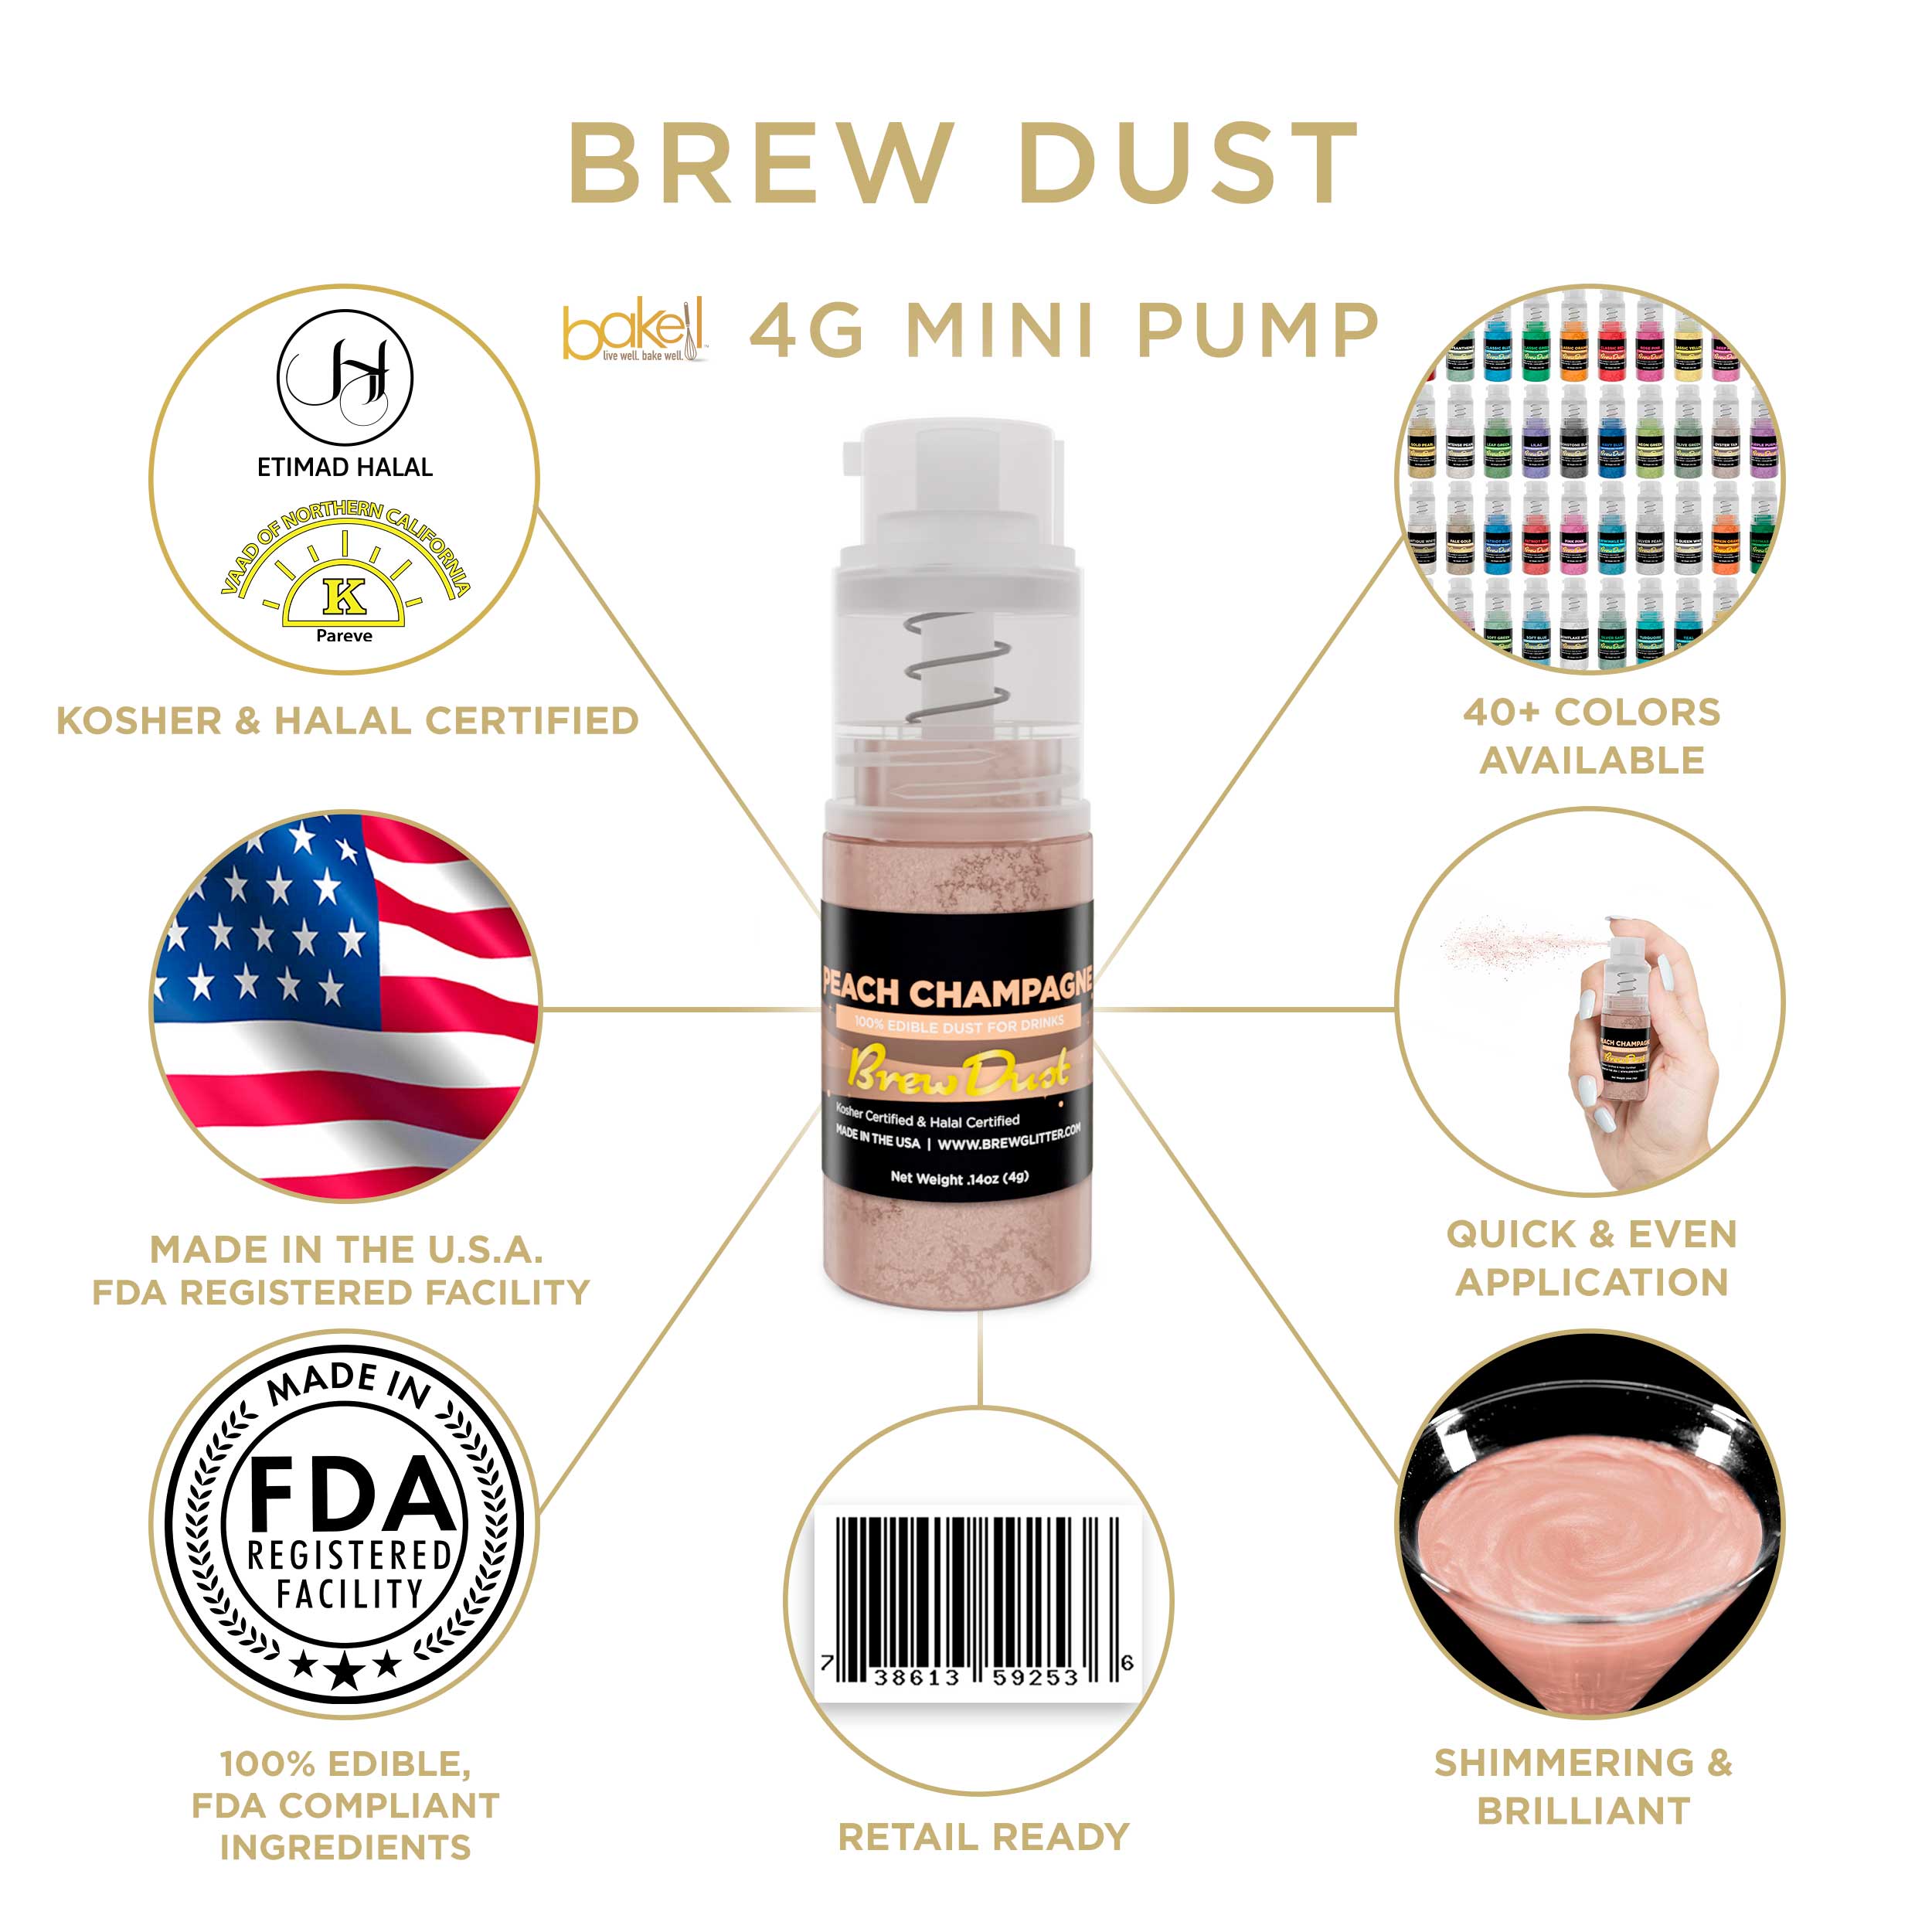 Peach Champagne Brew Dust Miniature Spray Pump | Infographic and Information